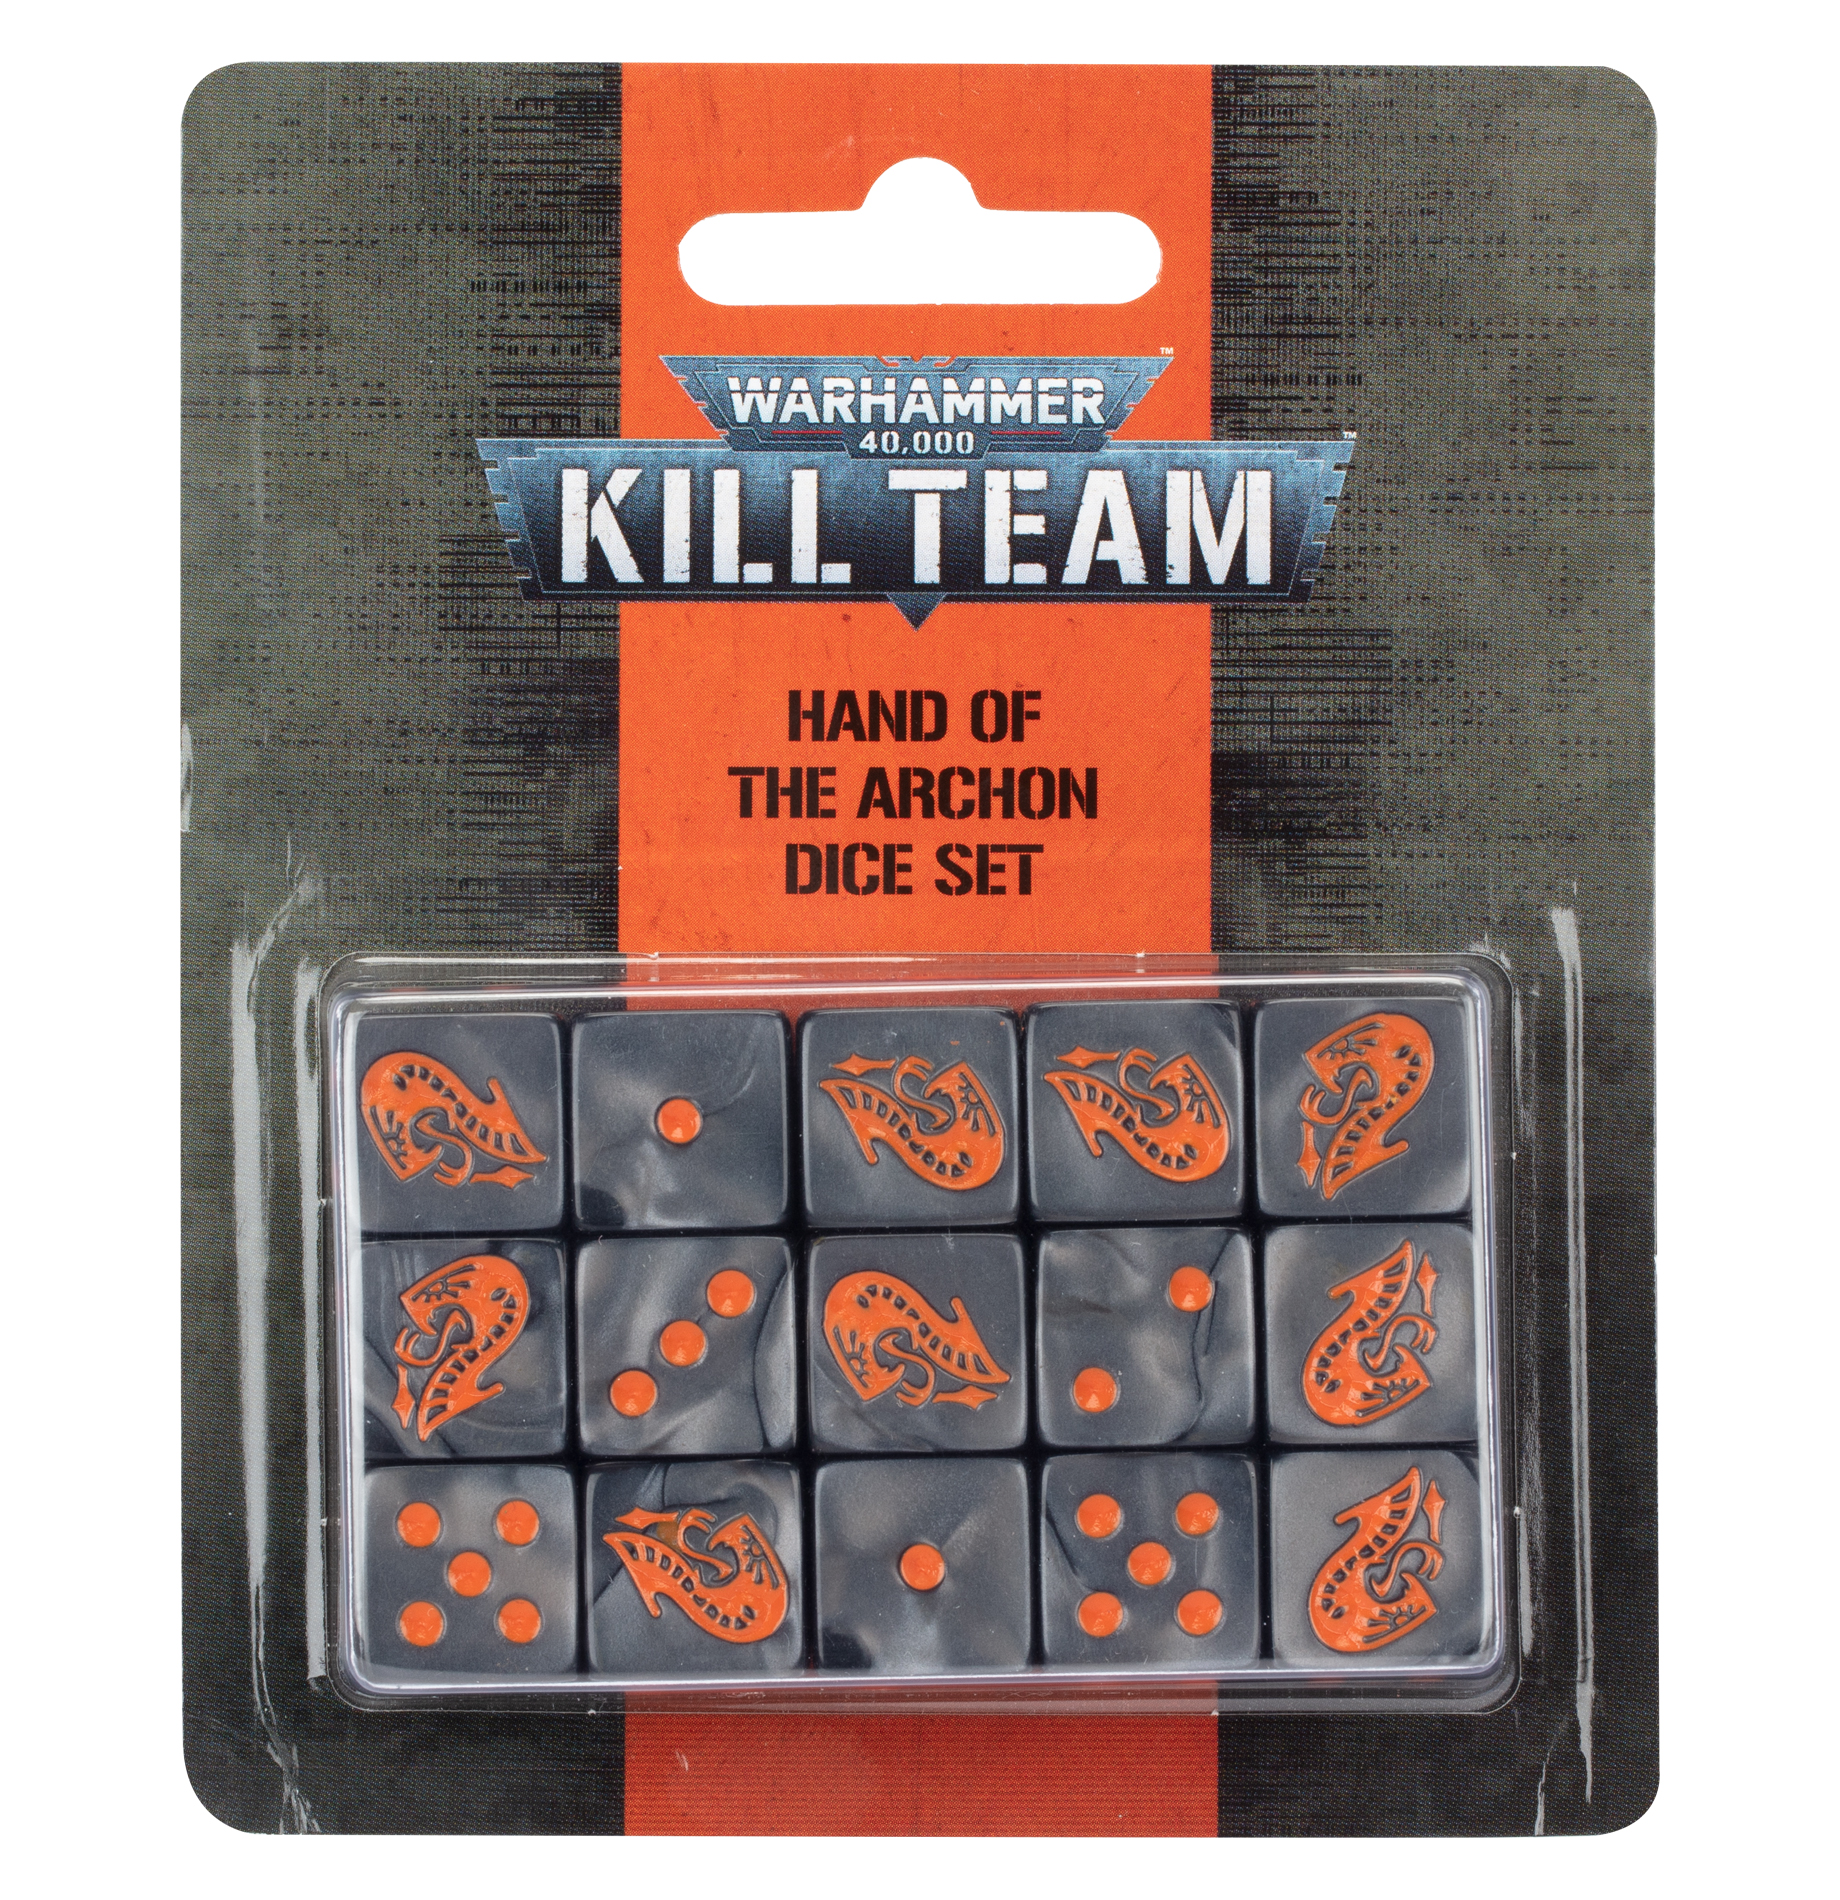 Warhammer 40,000: Kill Team: Hand of the Archon Dice 